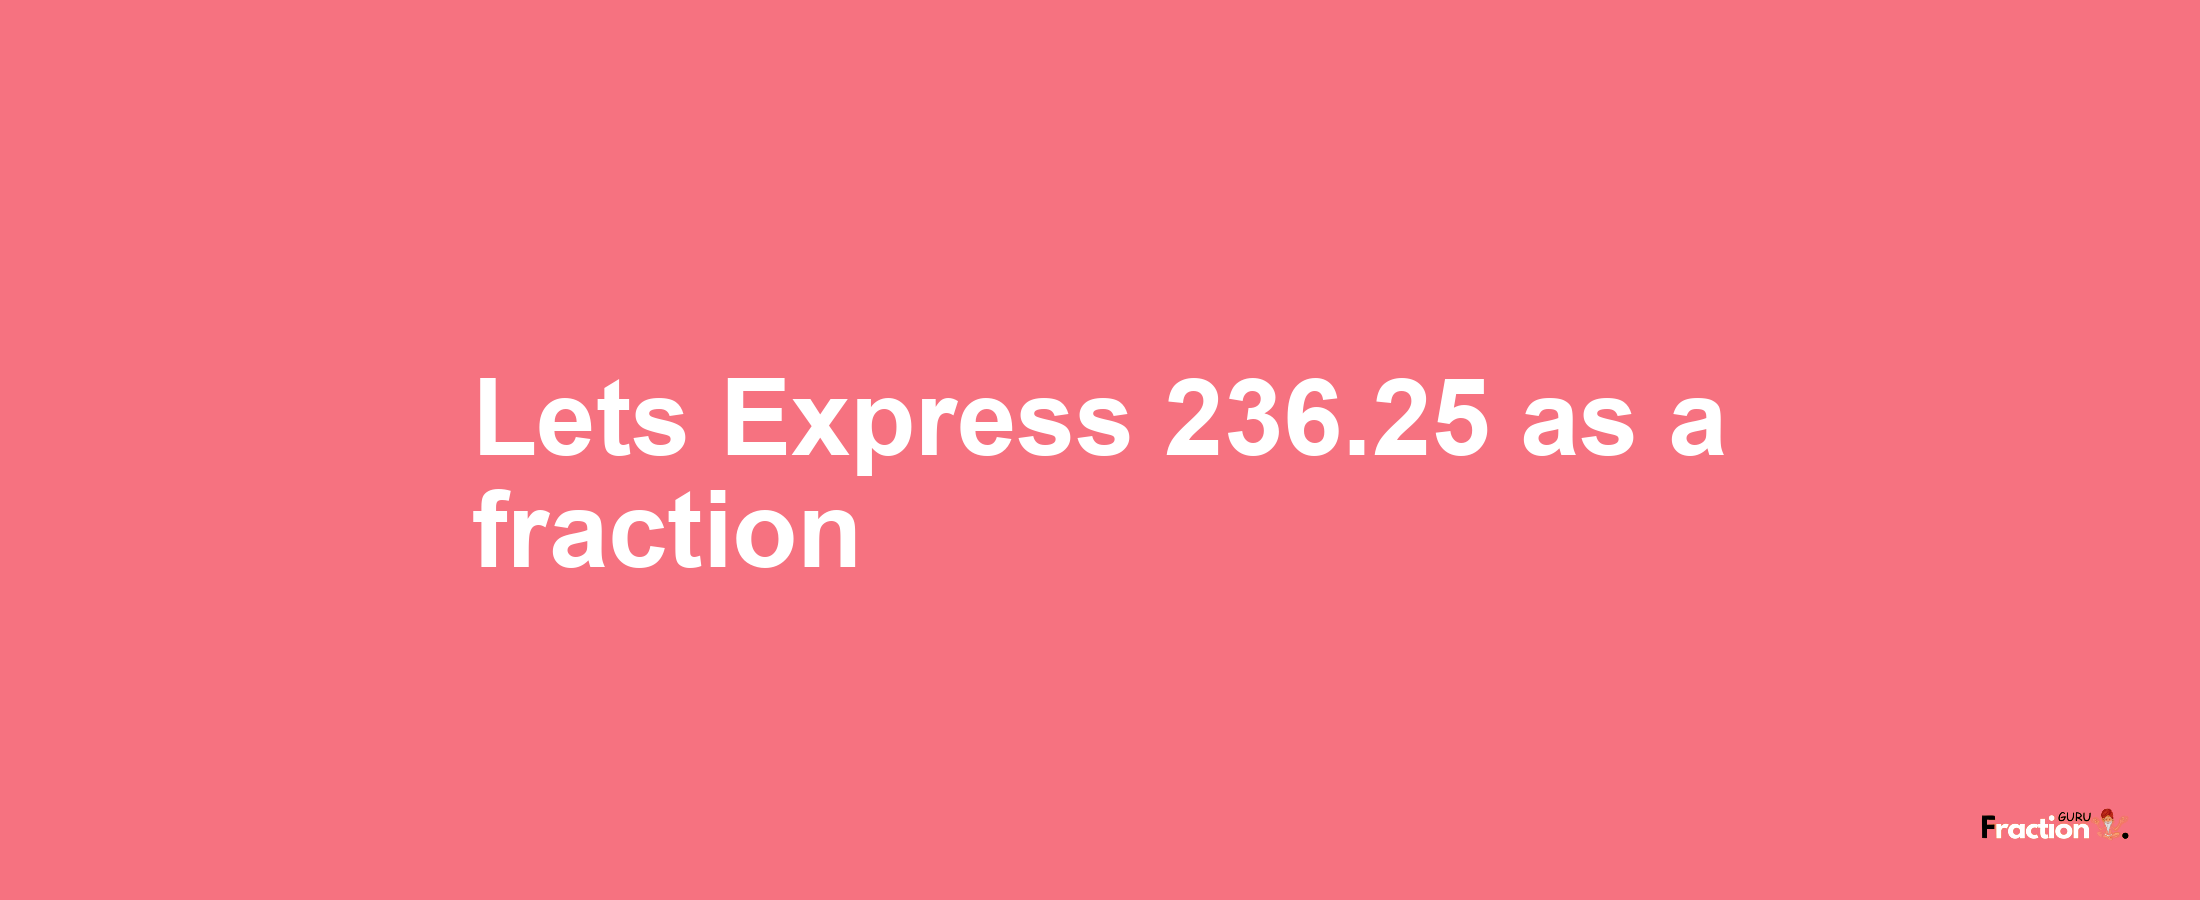 Lets Express 236.25 as afraction